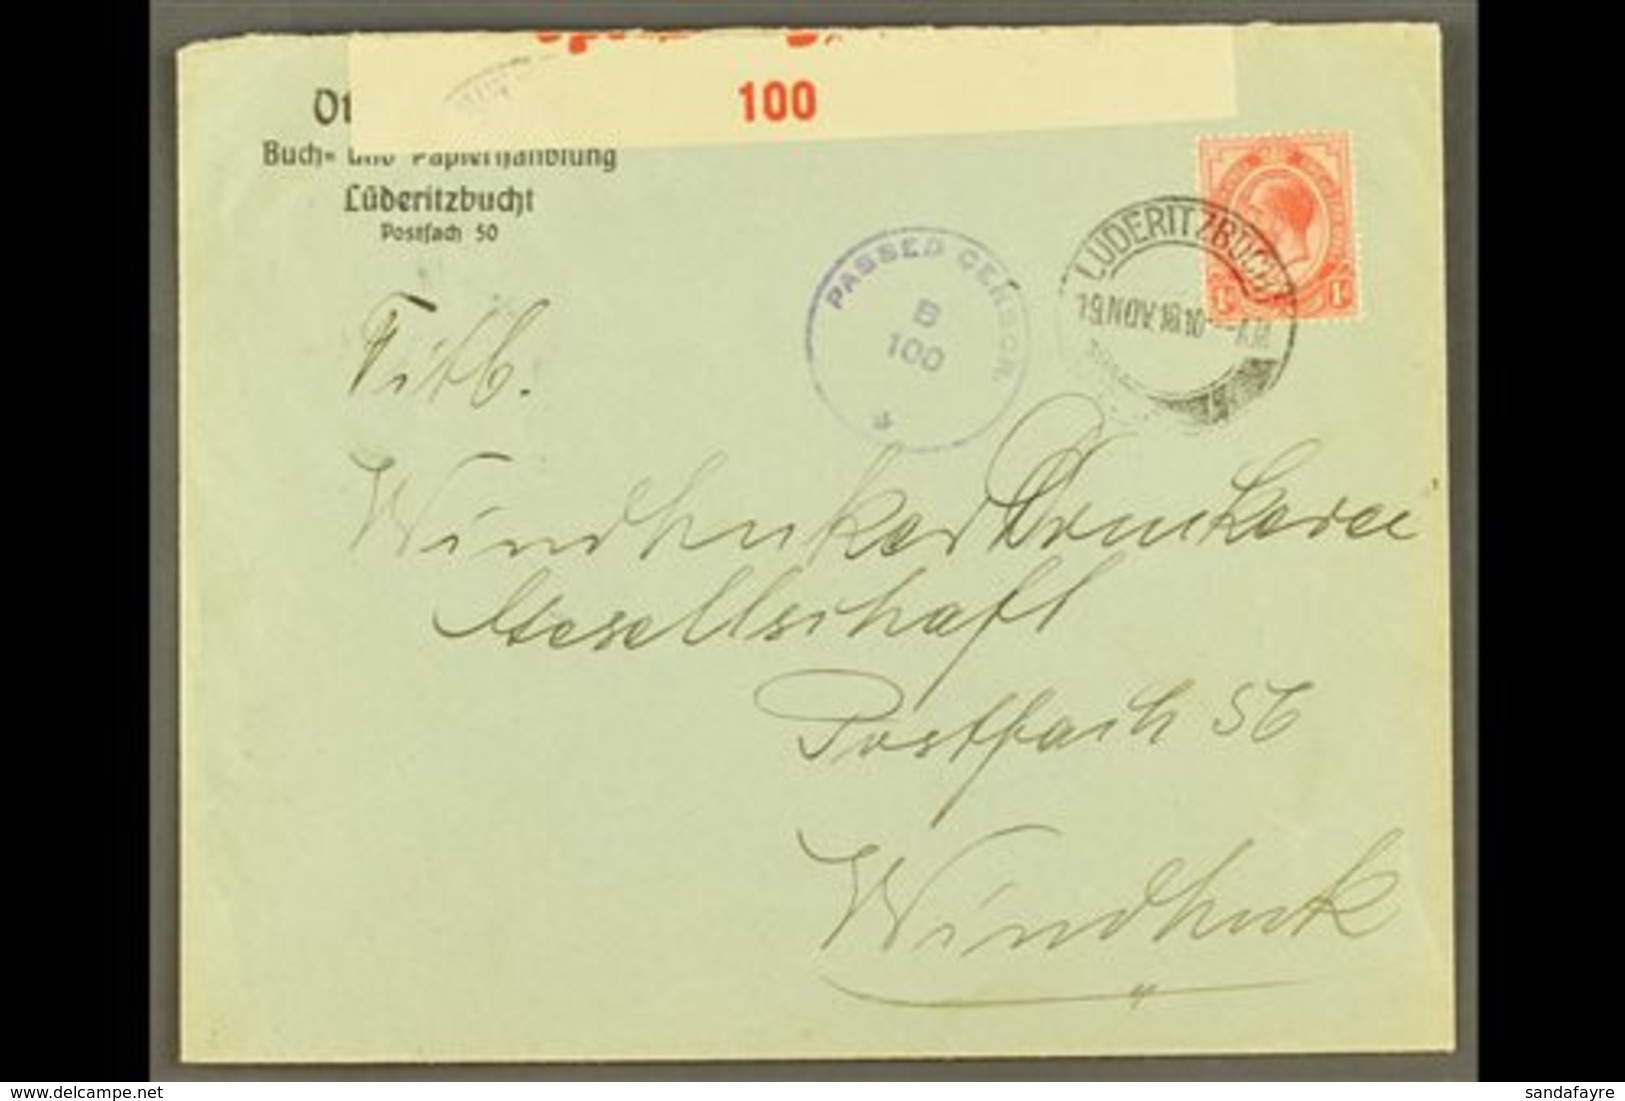 1918 (19 Nov) Printed Cover To Windhuk Bearing 1d Union Stamp Tied By "LUDERITZBUCHT" Cds Cancellation, Putzel Type B9 O - Zuidwest-Afrika (1923-1990)